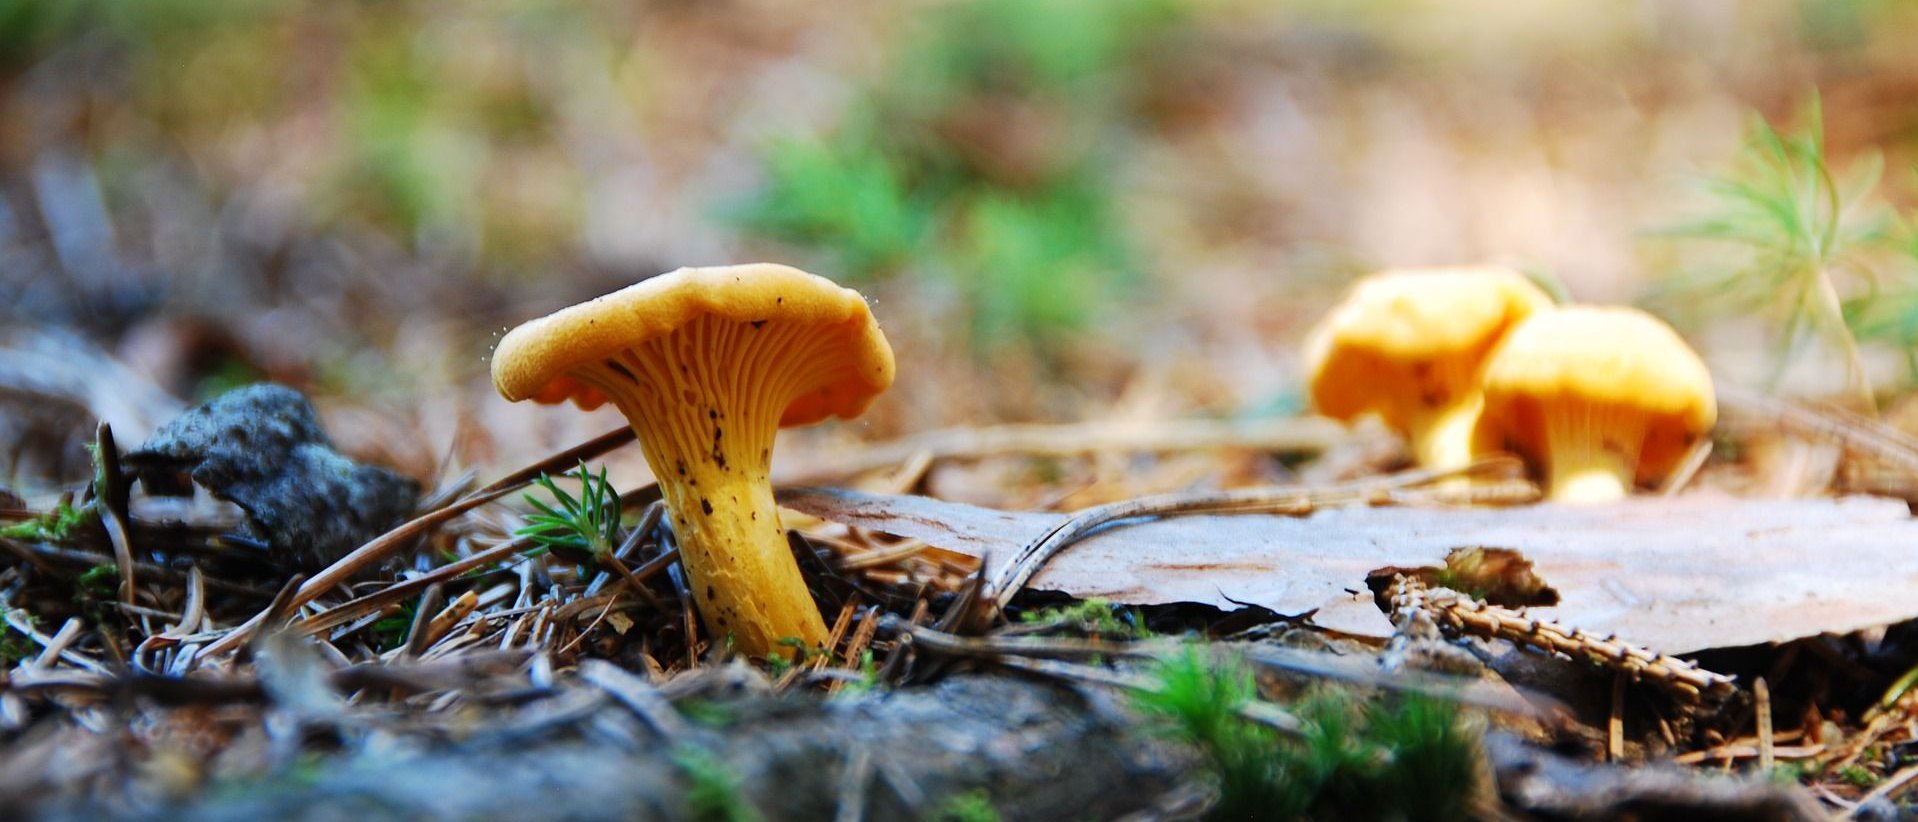 Chanterelle mushrooms in the forest.